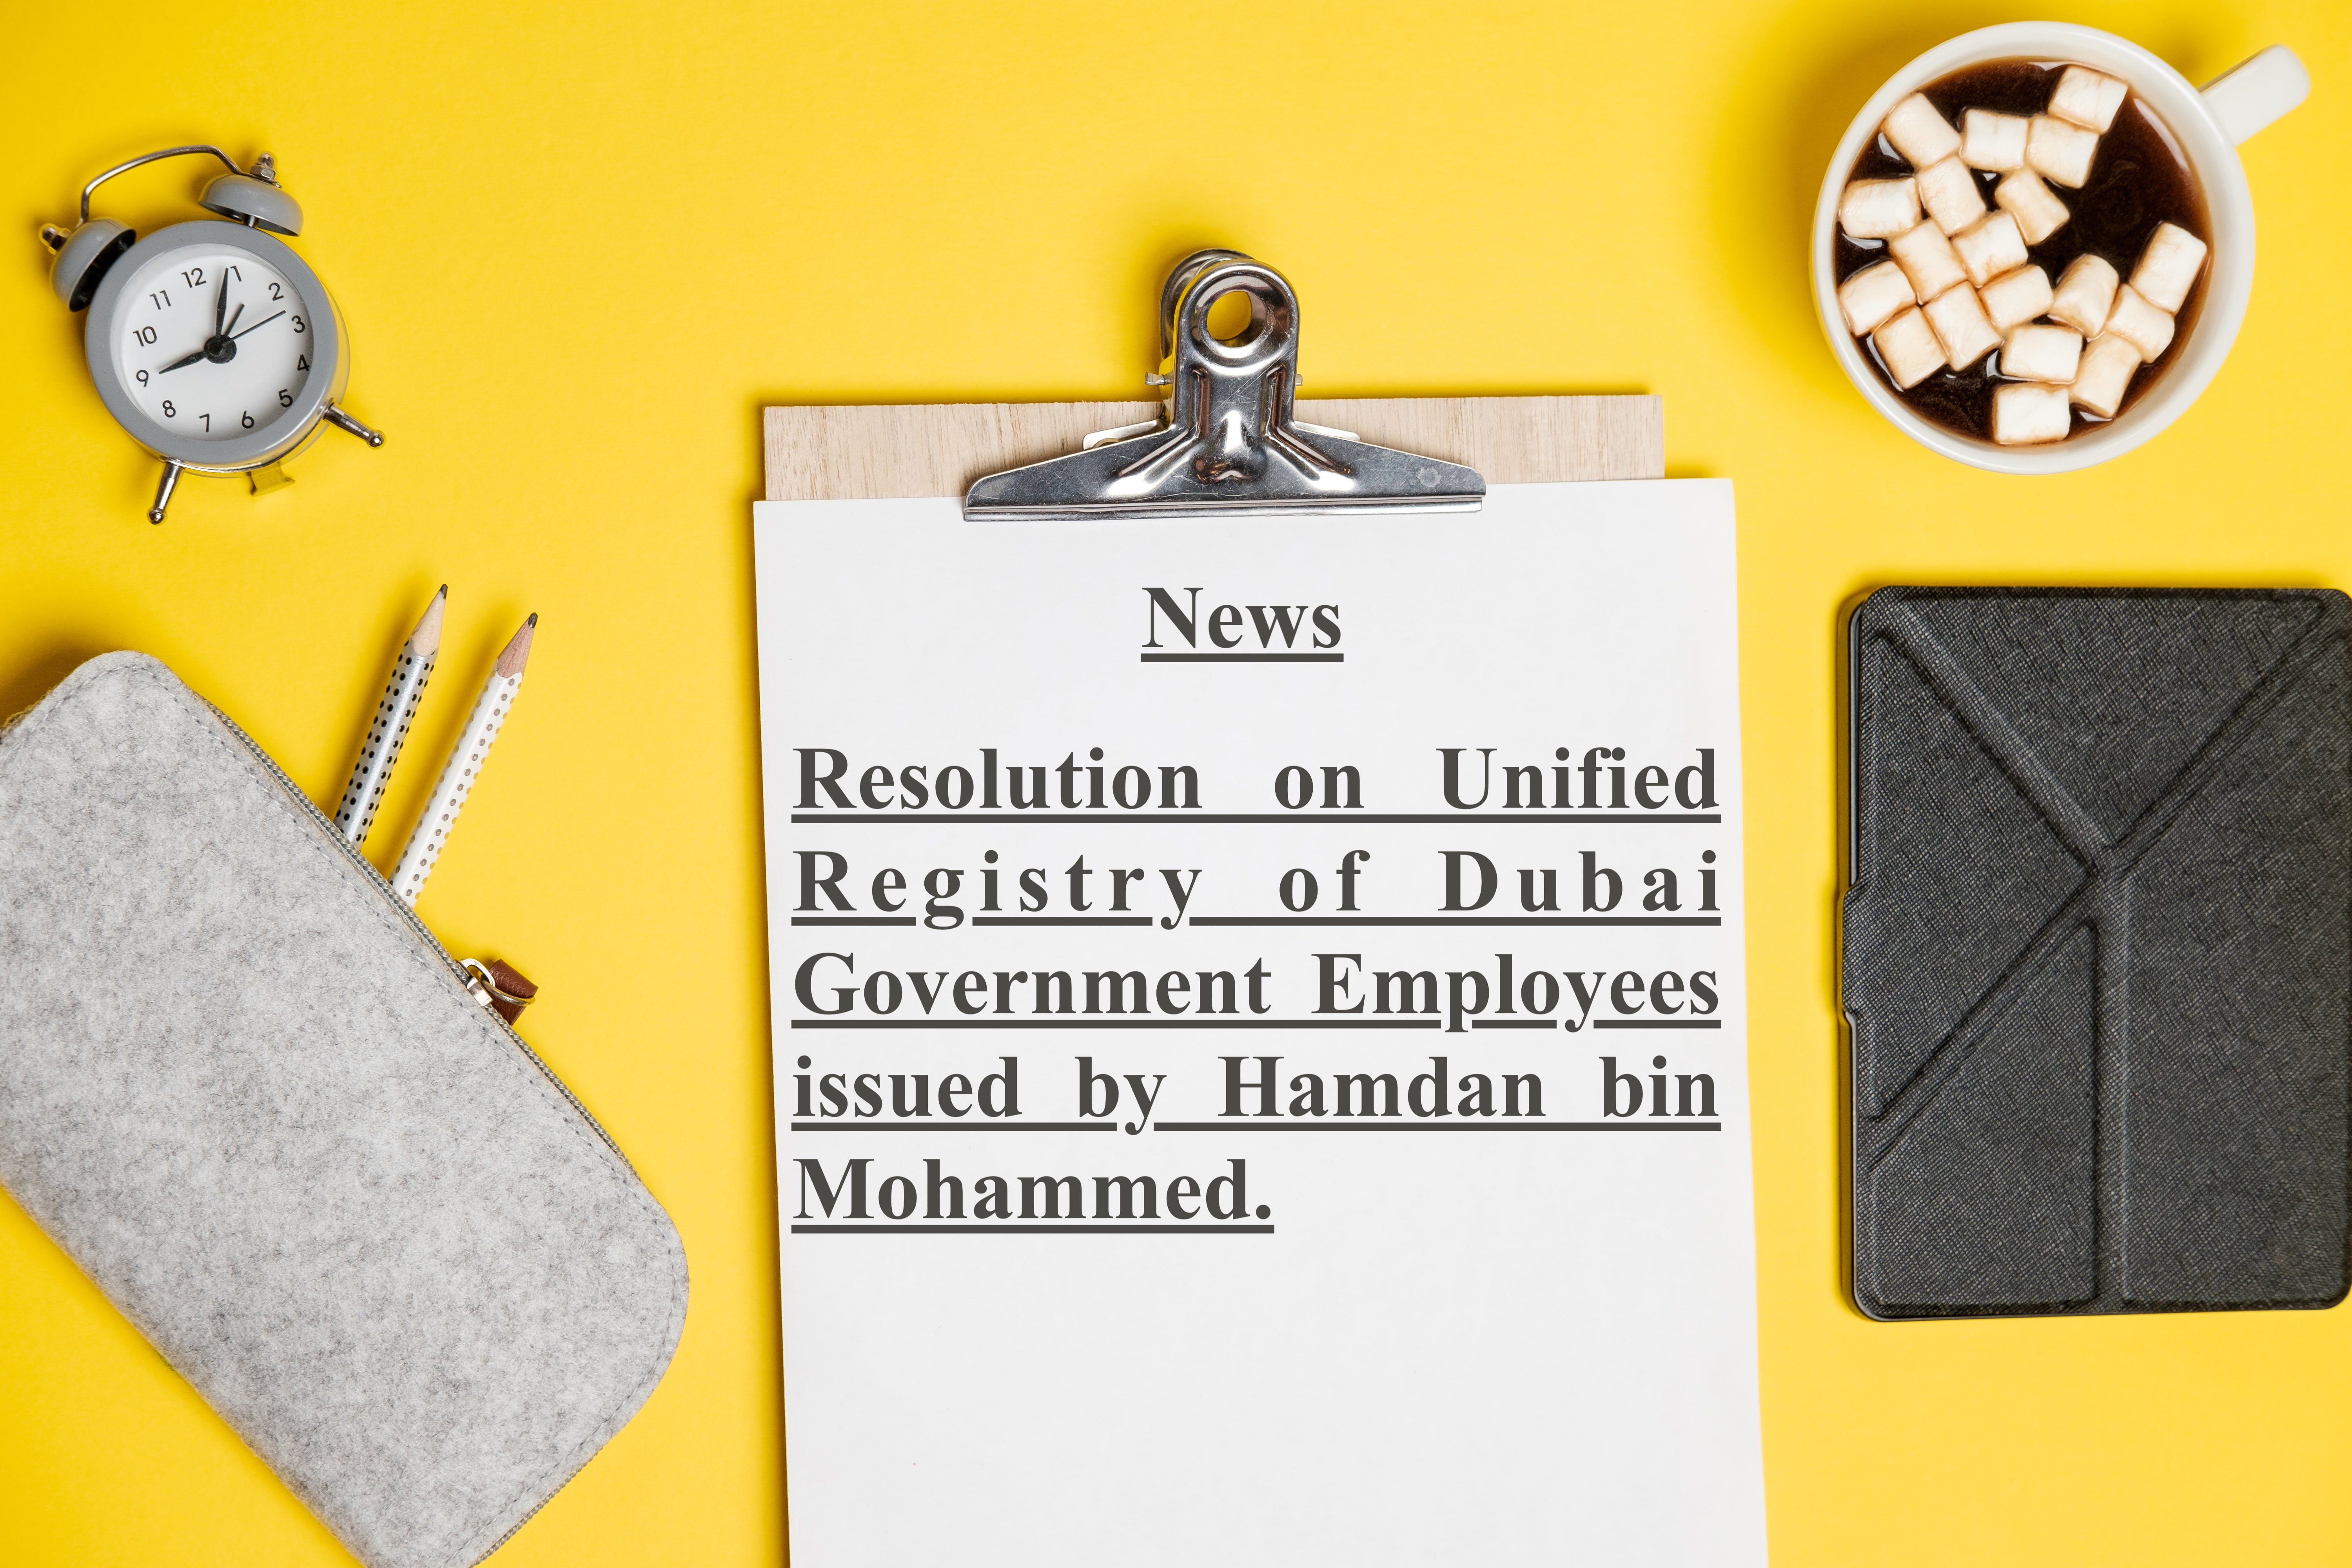 Resolution on Unified Registry of Dubai Government Employees issued by Hamdan bin Mohammed